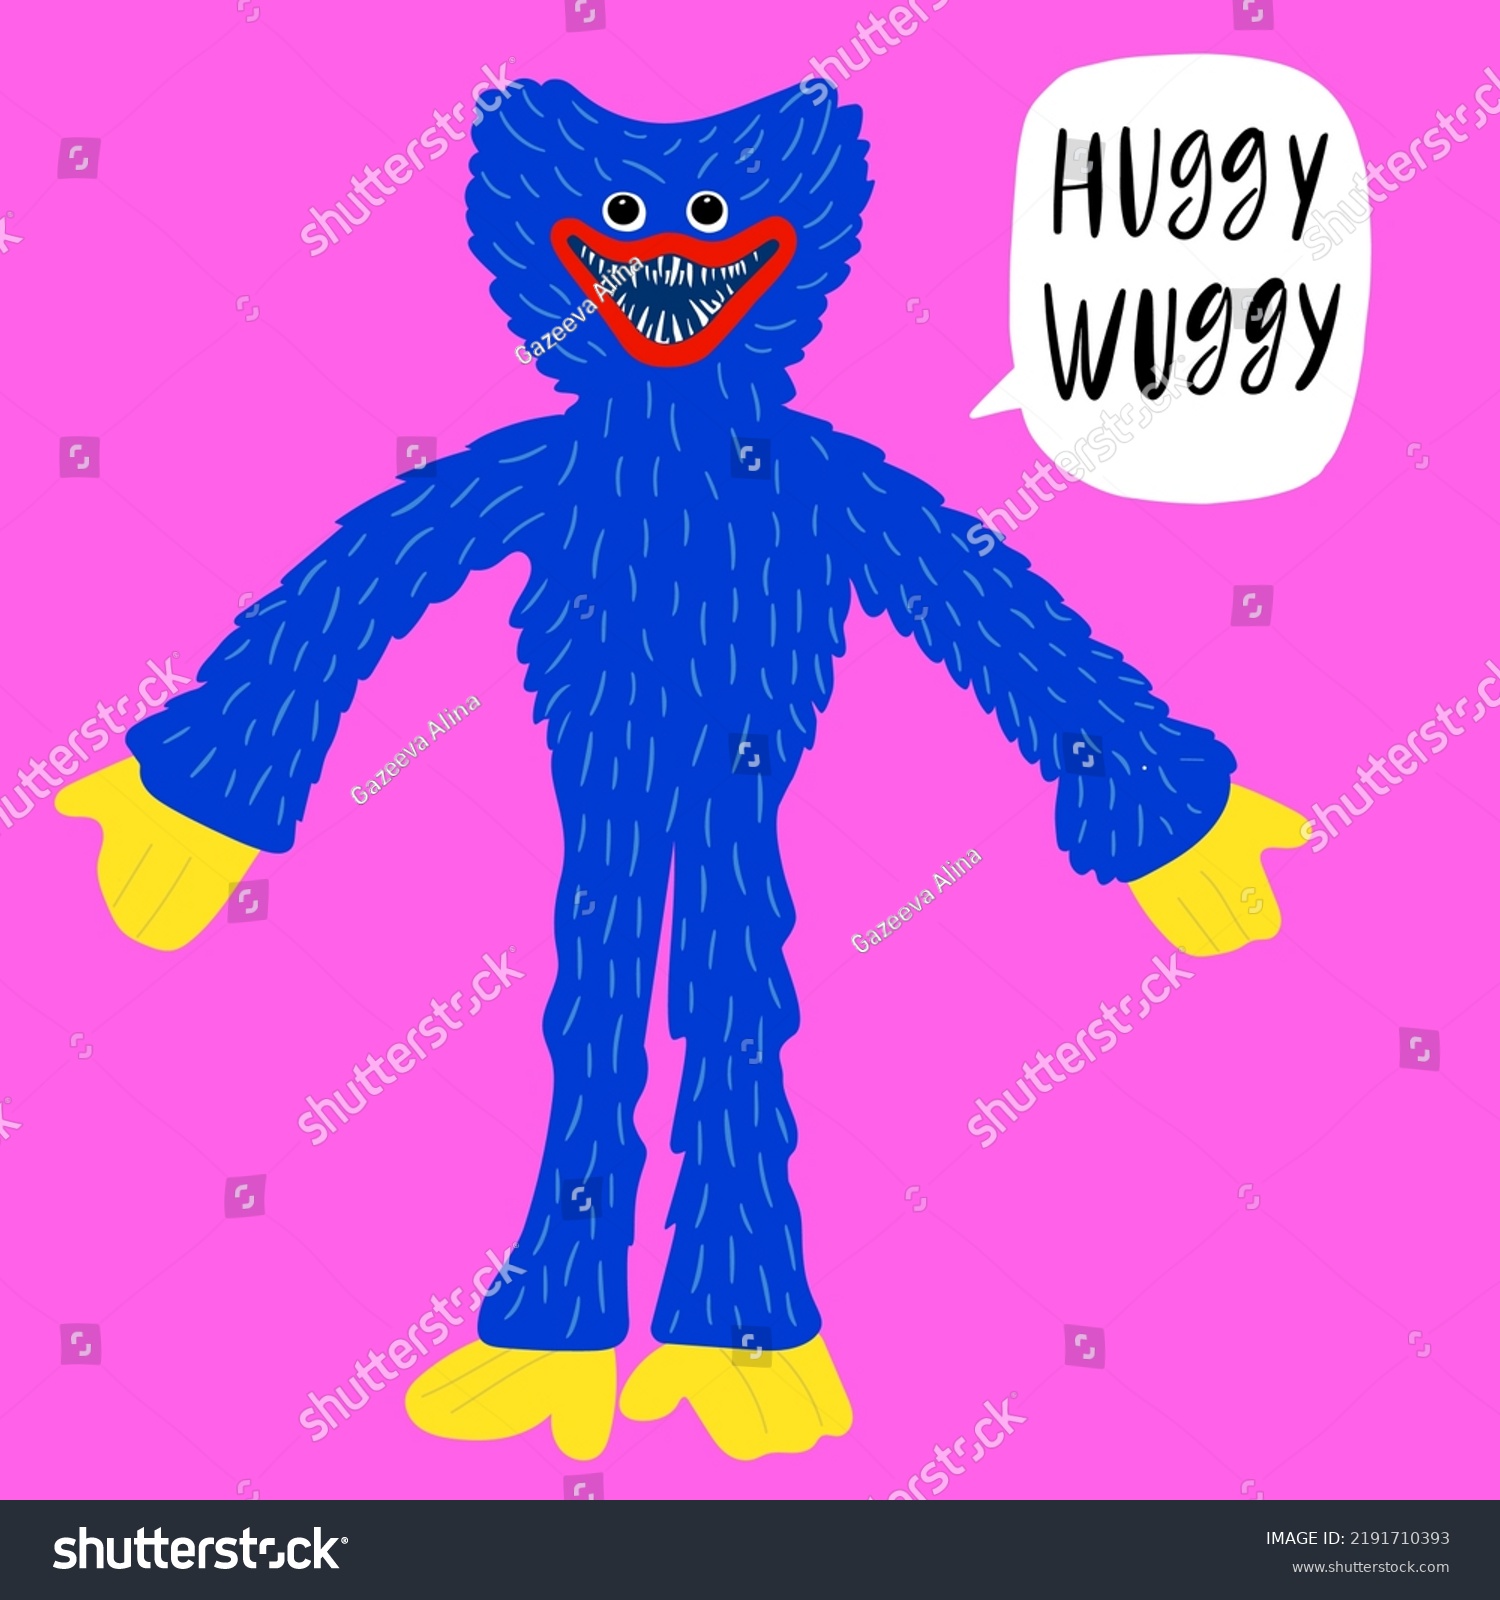 SVG of Blue Huggy Wuggy on a pink background.Huggie Wuggies svg